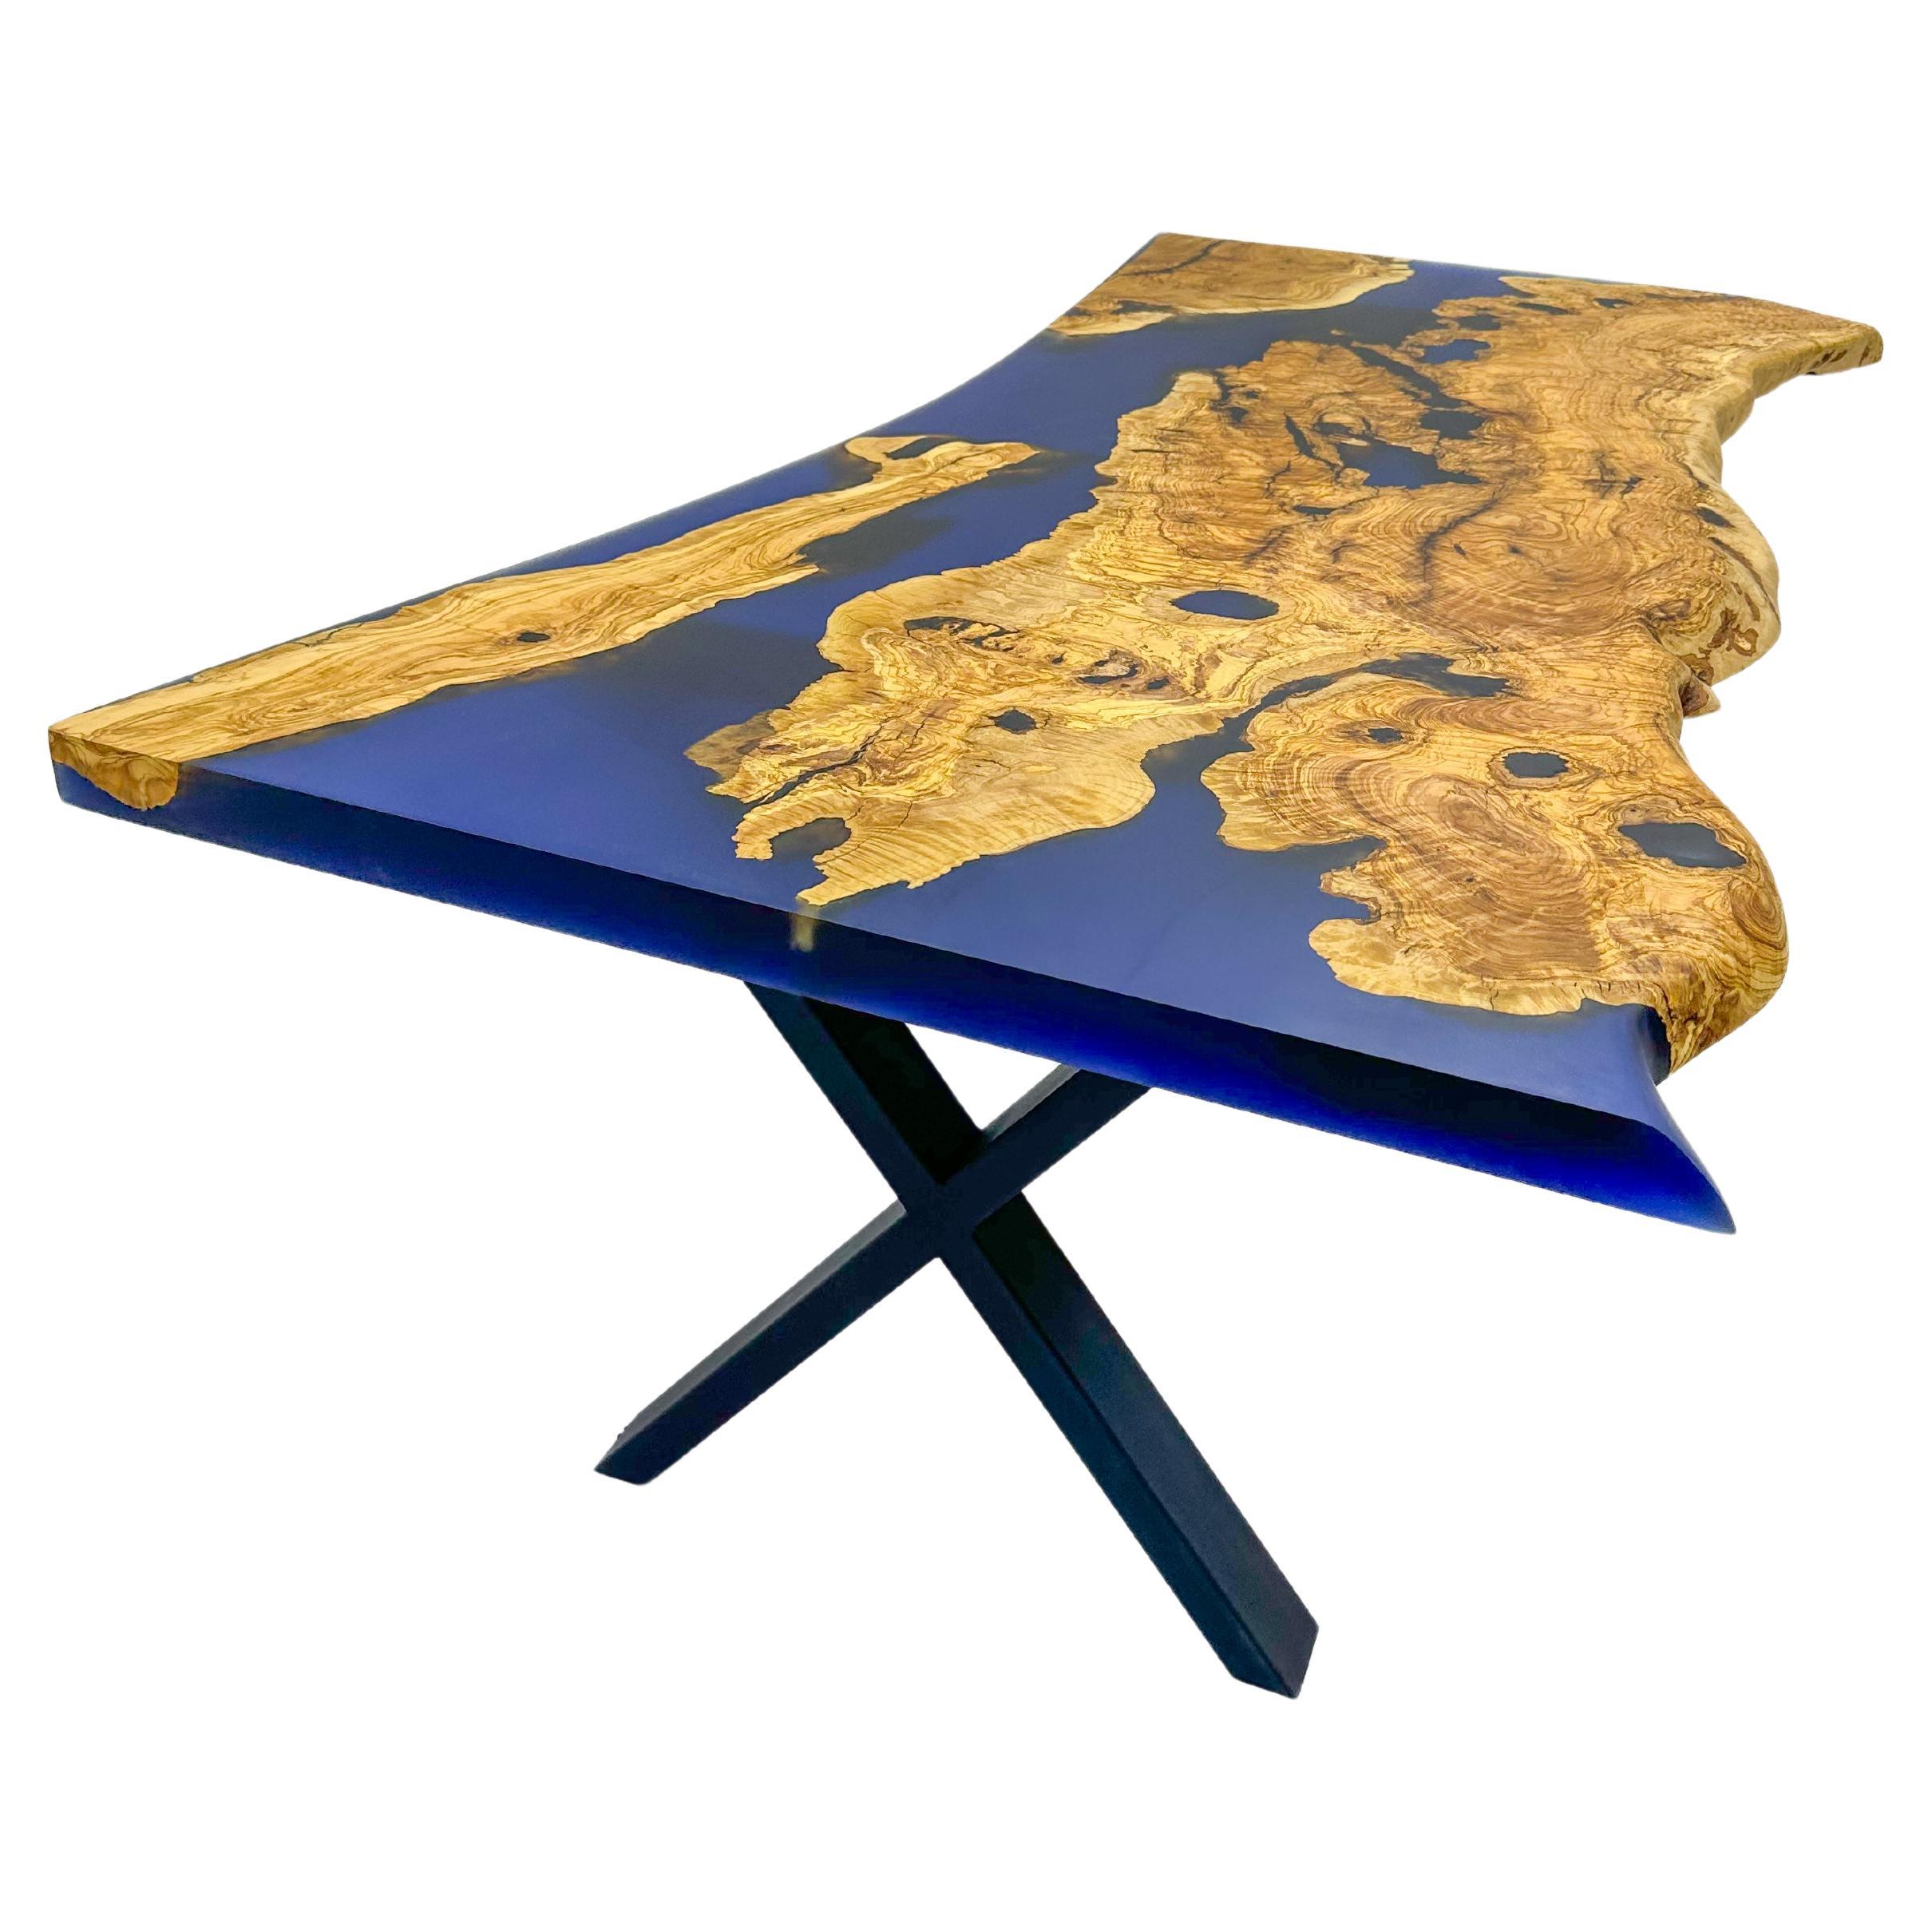 Custom Olive Epoxy Table

This stunning table is made of Mediterranean Olive wood. The unique beauty of the natural curves of olive wood combined with blue epoxy is seen in this table.

All woods have its own natural shape. Therefore, each one has